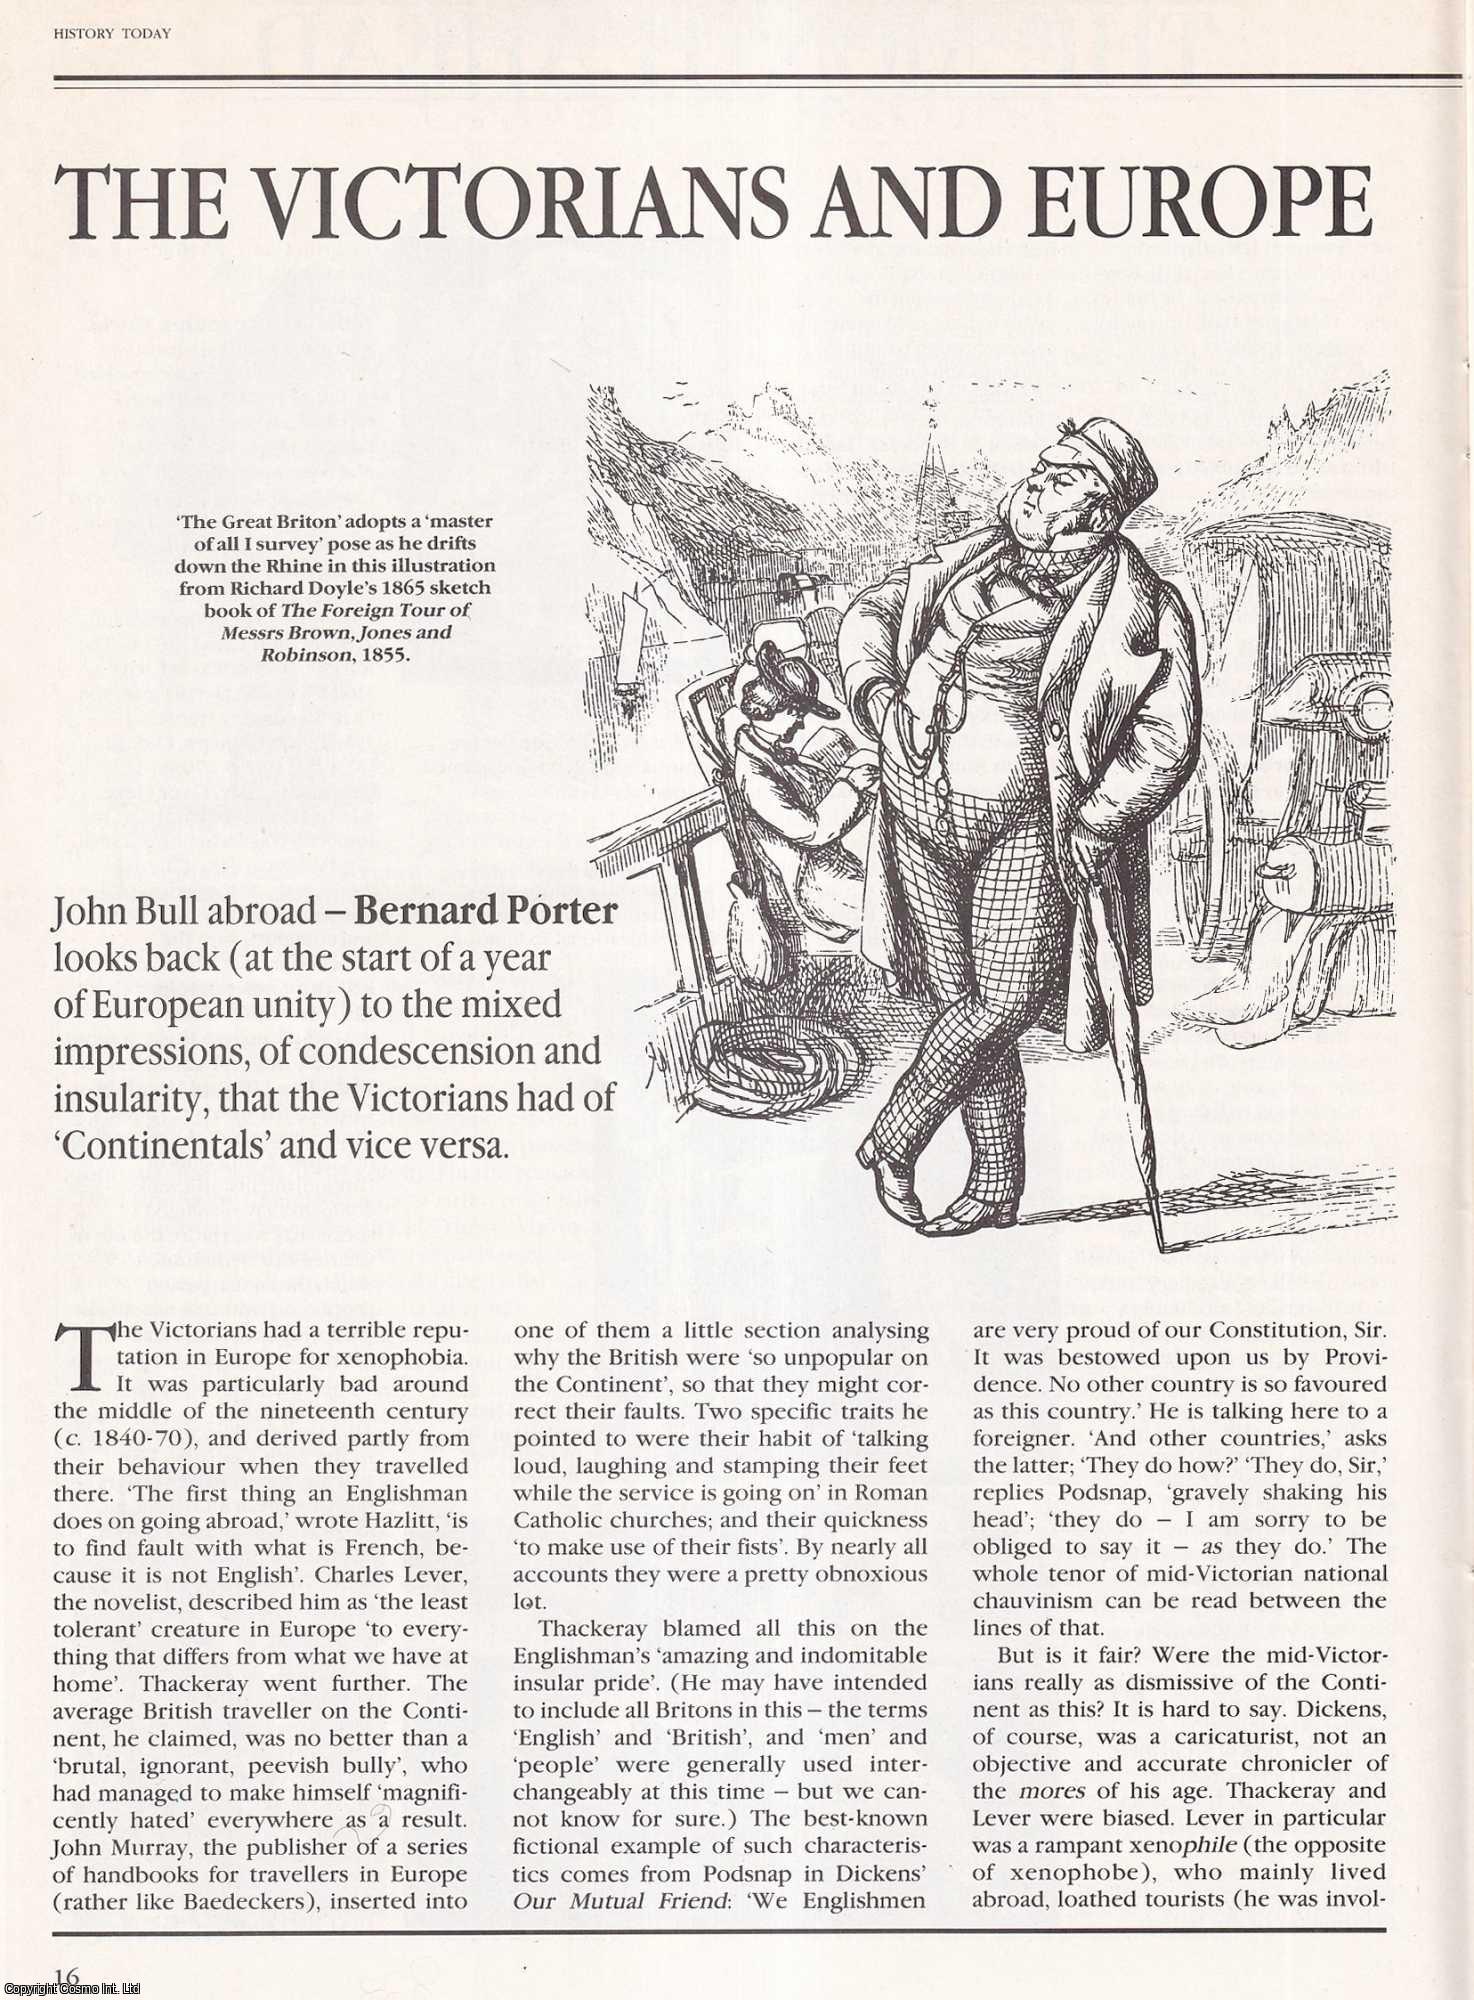 Bernard Porter - The Victorians and Europe: John Bull Abroad. An original article from History Today, 1992.